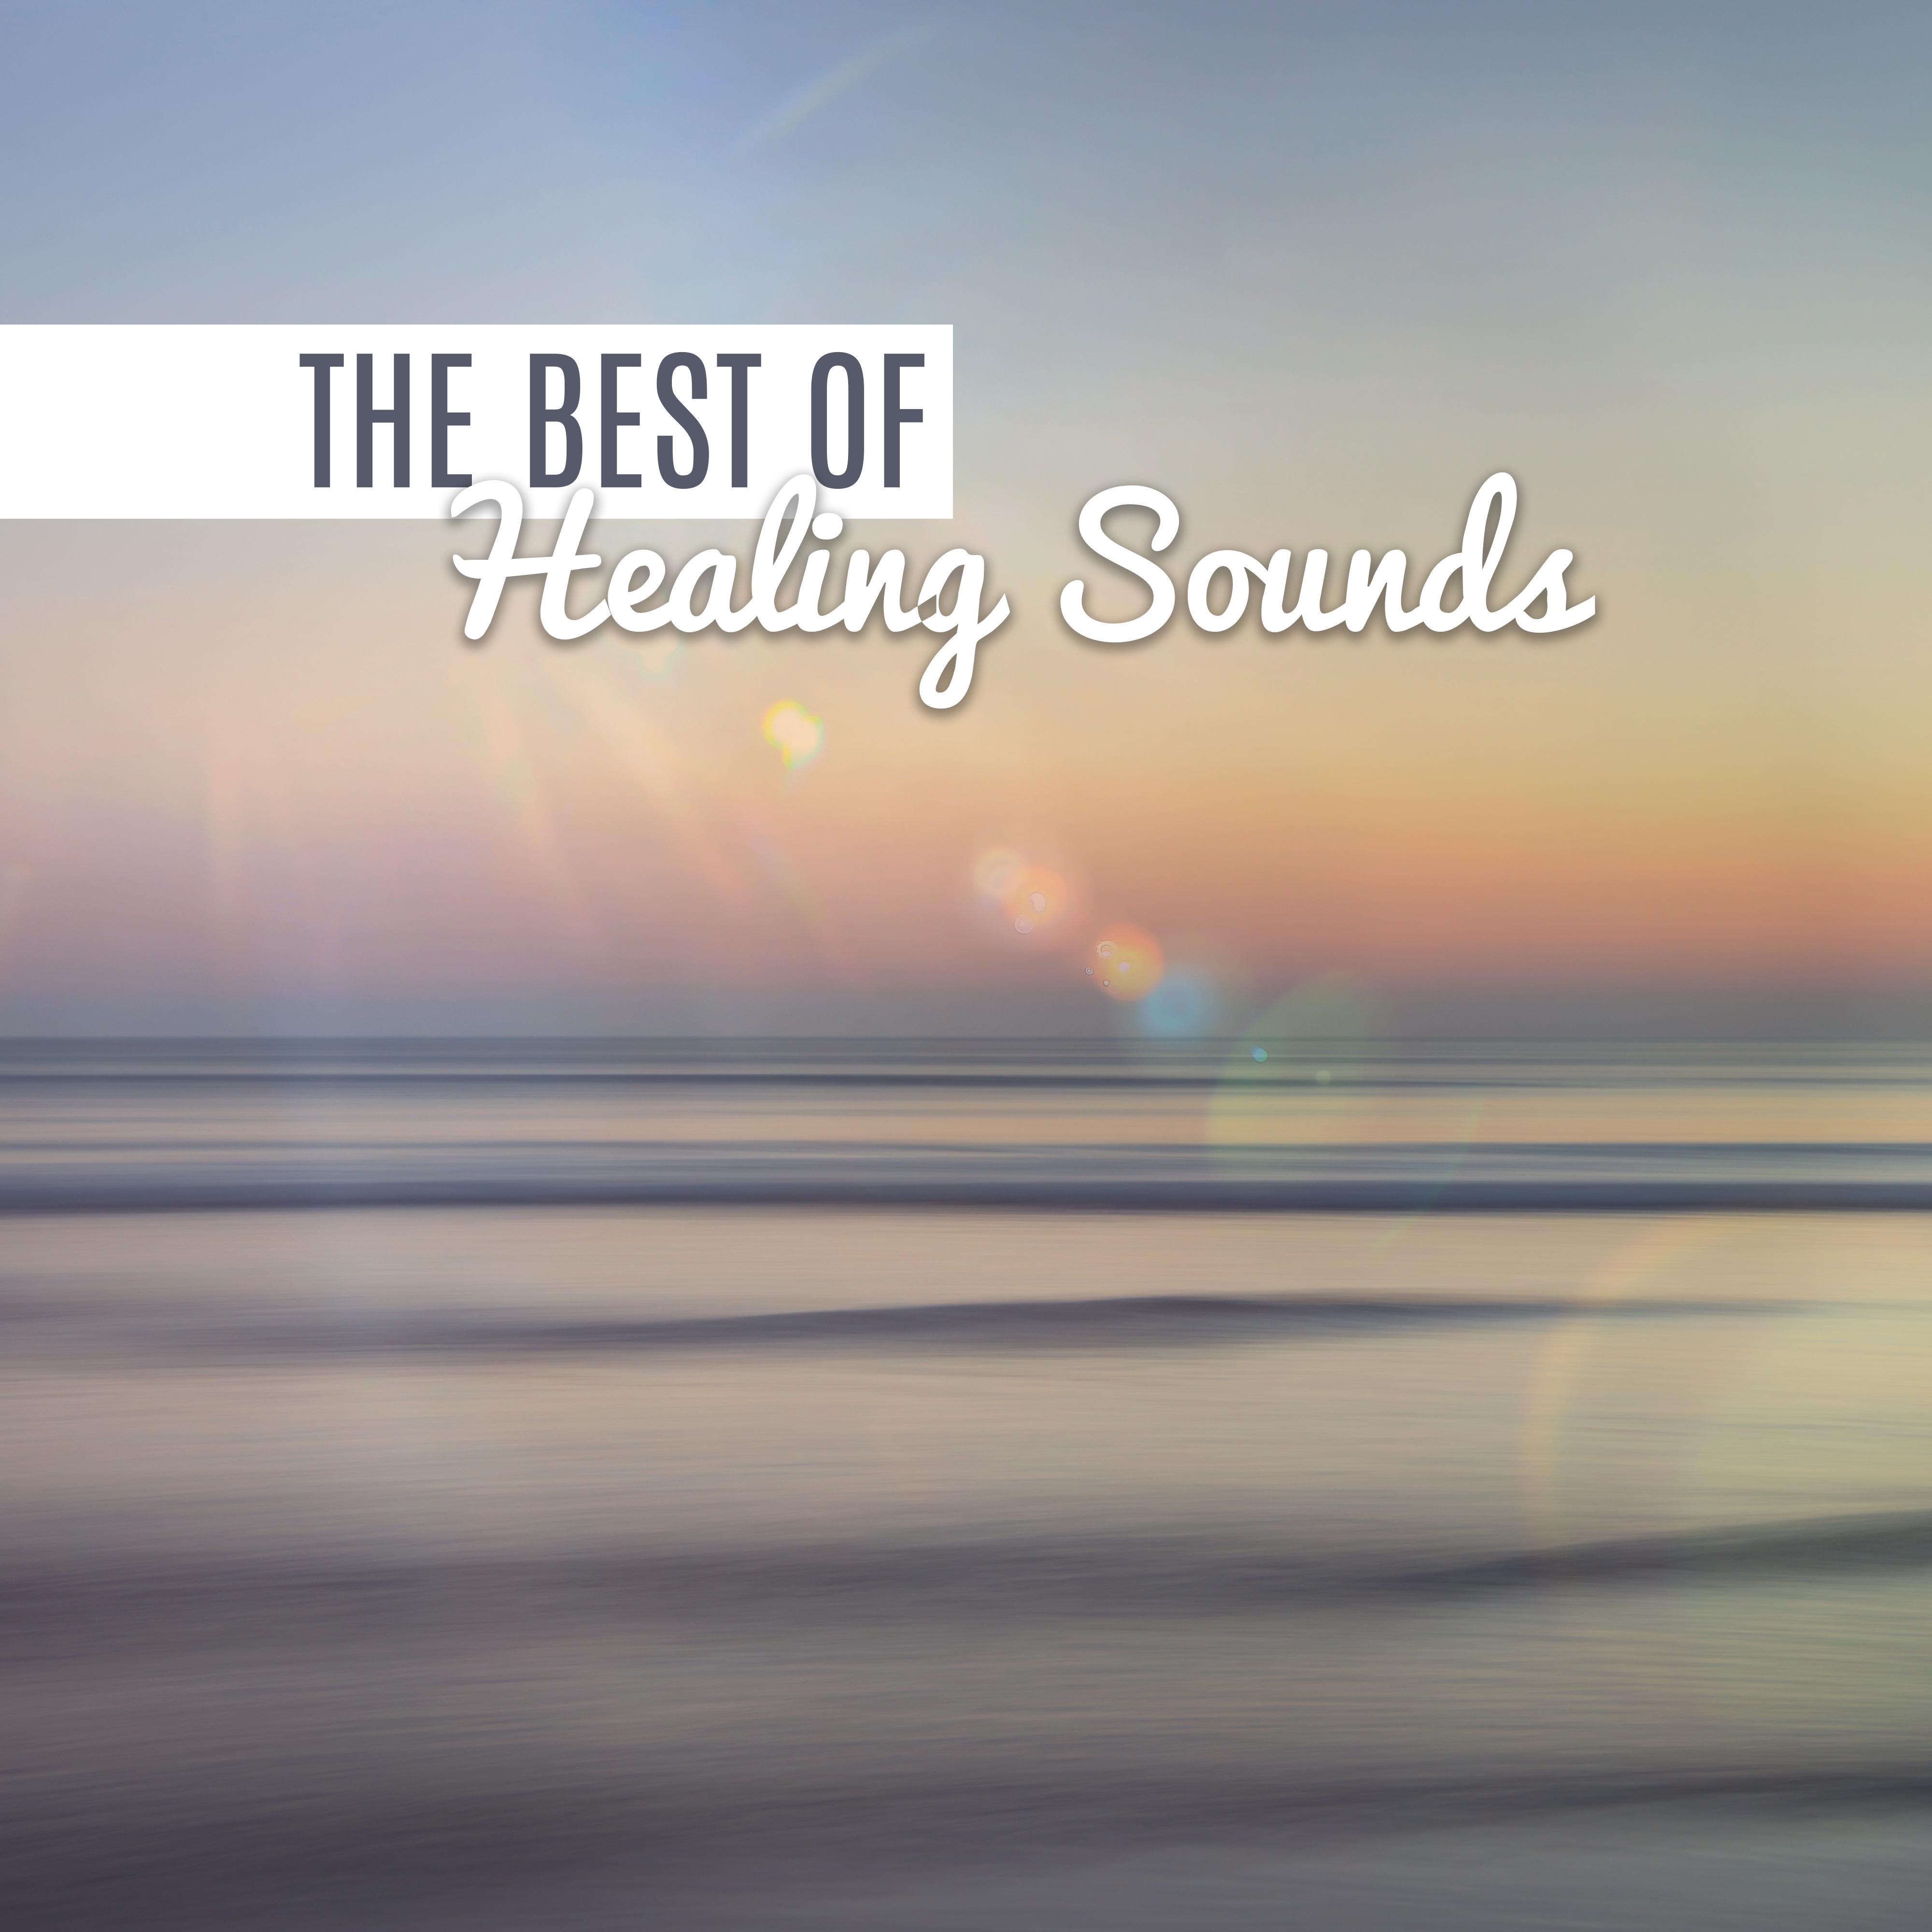 The Best of Healing Sounds  Relaxing Sounds, Water Waves, Harmony, New Age, Meditation  Relaxation